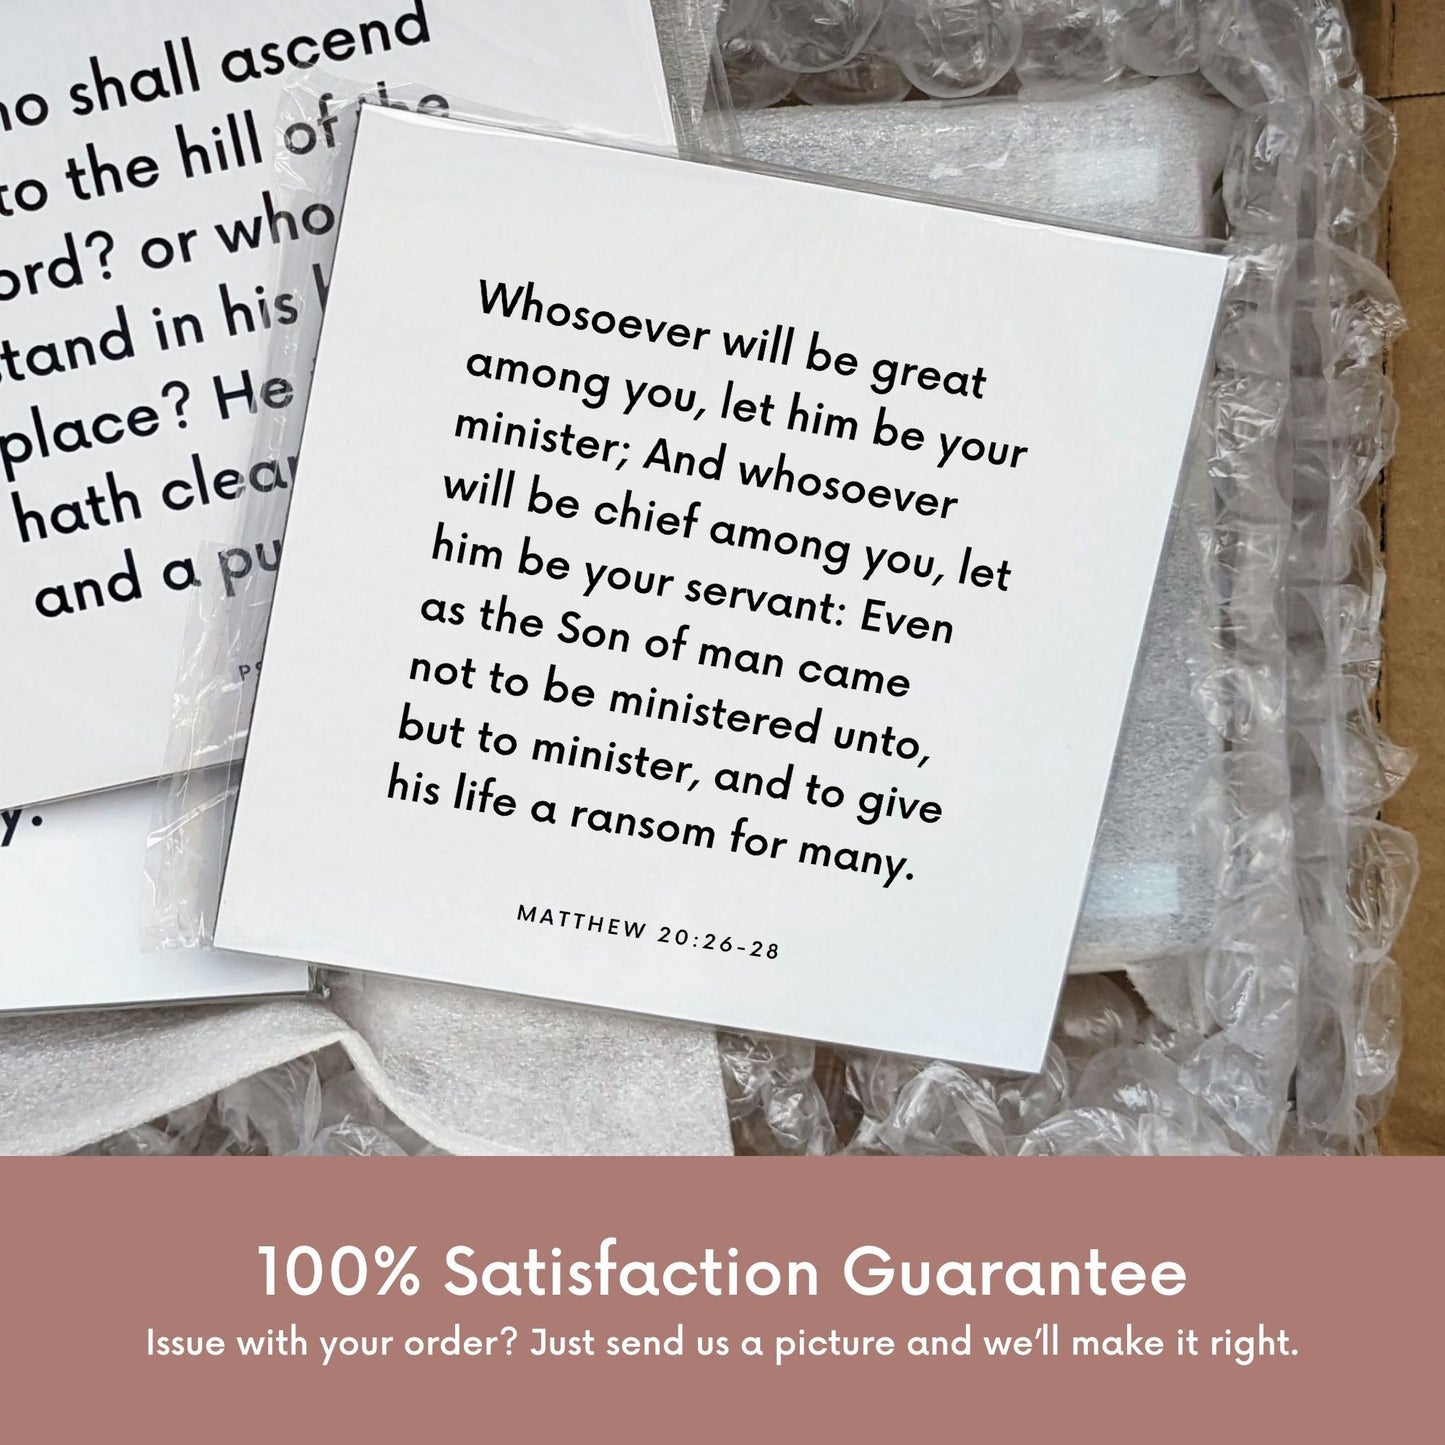 Shipping materials for scripture tile of Matthew 20:26-28 - "Whosoever will be great among you, let him be your minister"